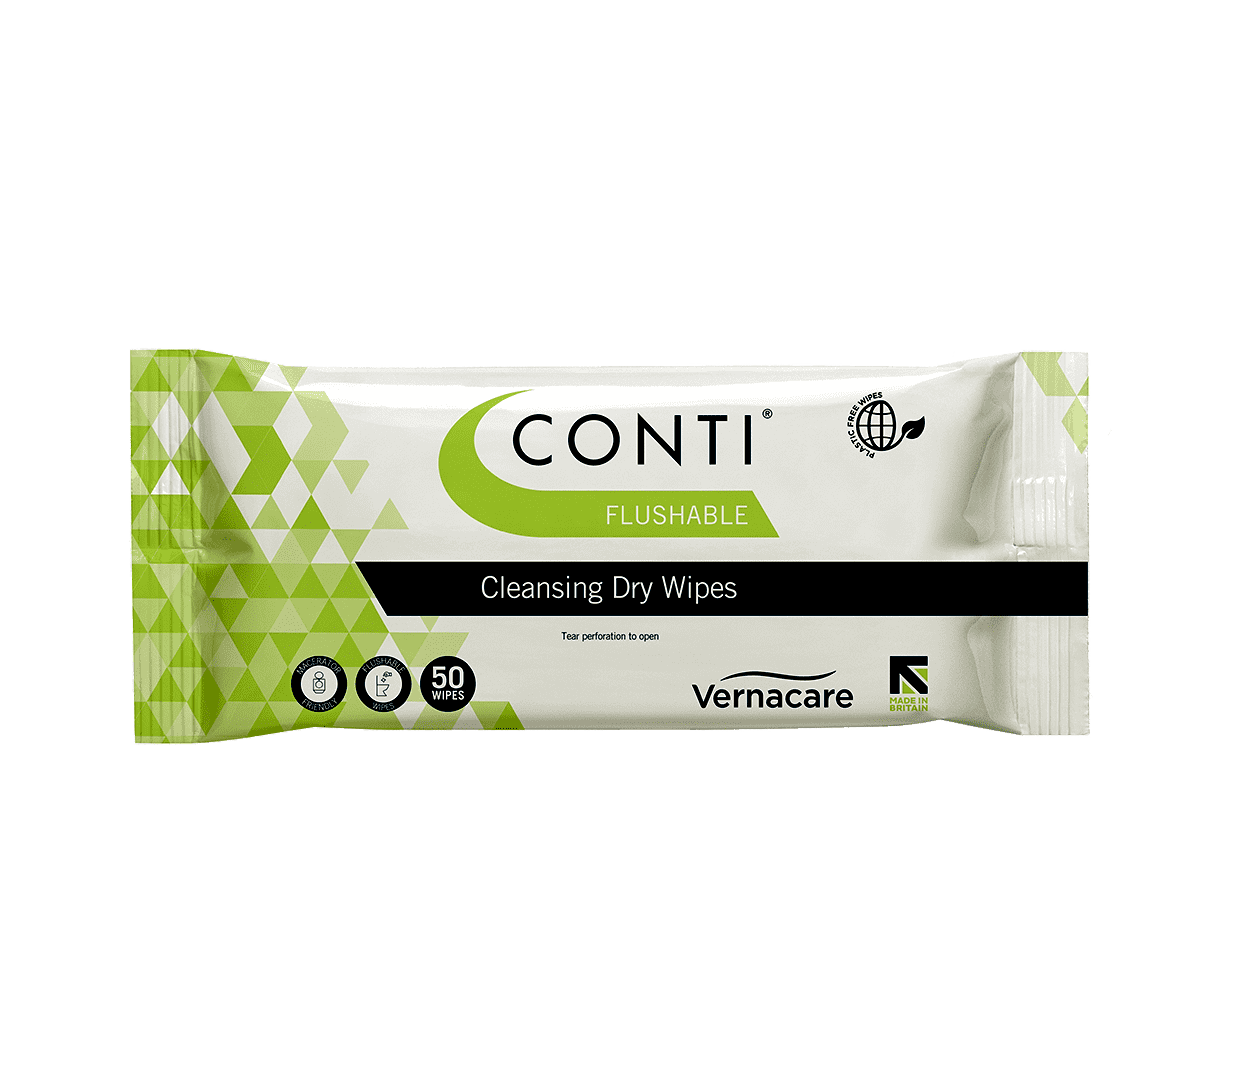 Patient dry cleansing wipes that are 100% plastic free, with the added convenience of quick, safe, and hygienic disposal in either a toilet or macerator making this dry wipe a better environmental option.